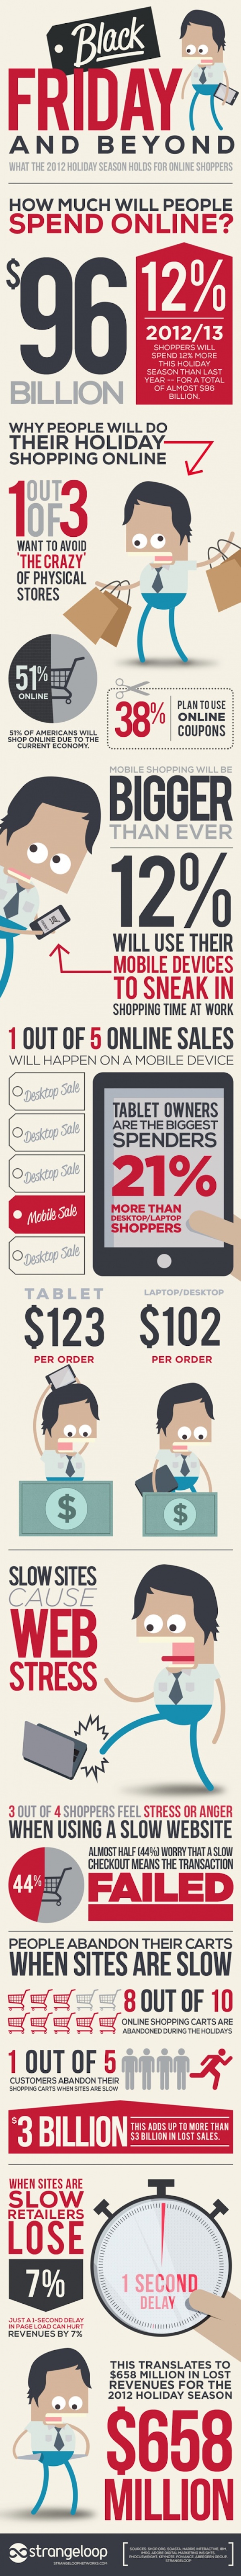 20 Black Friday And Cyber Monday Infographics image 8174650121d5c6718a05ecdfc659f2ce.jpg